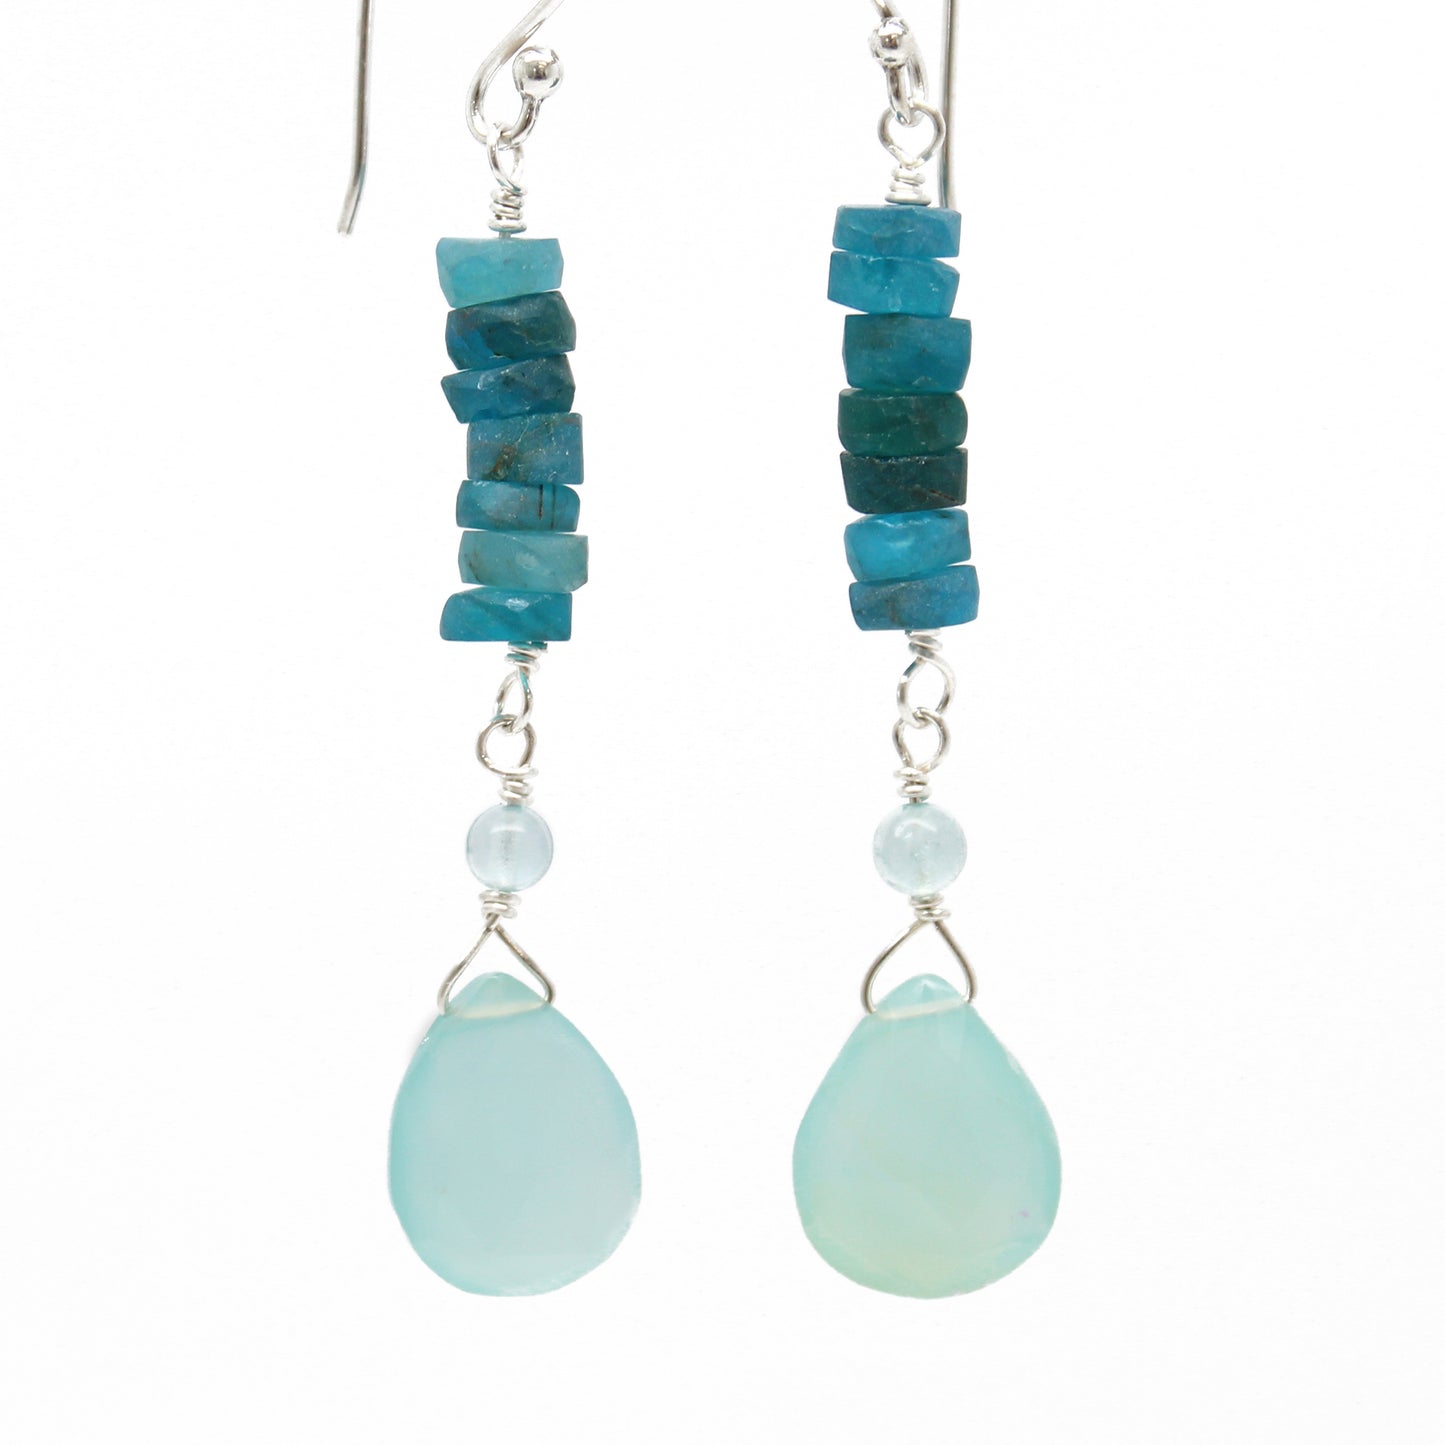 Apatite and Chalcedony Earrings in Sterling Silver – Kathy Bankston